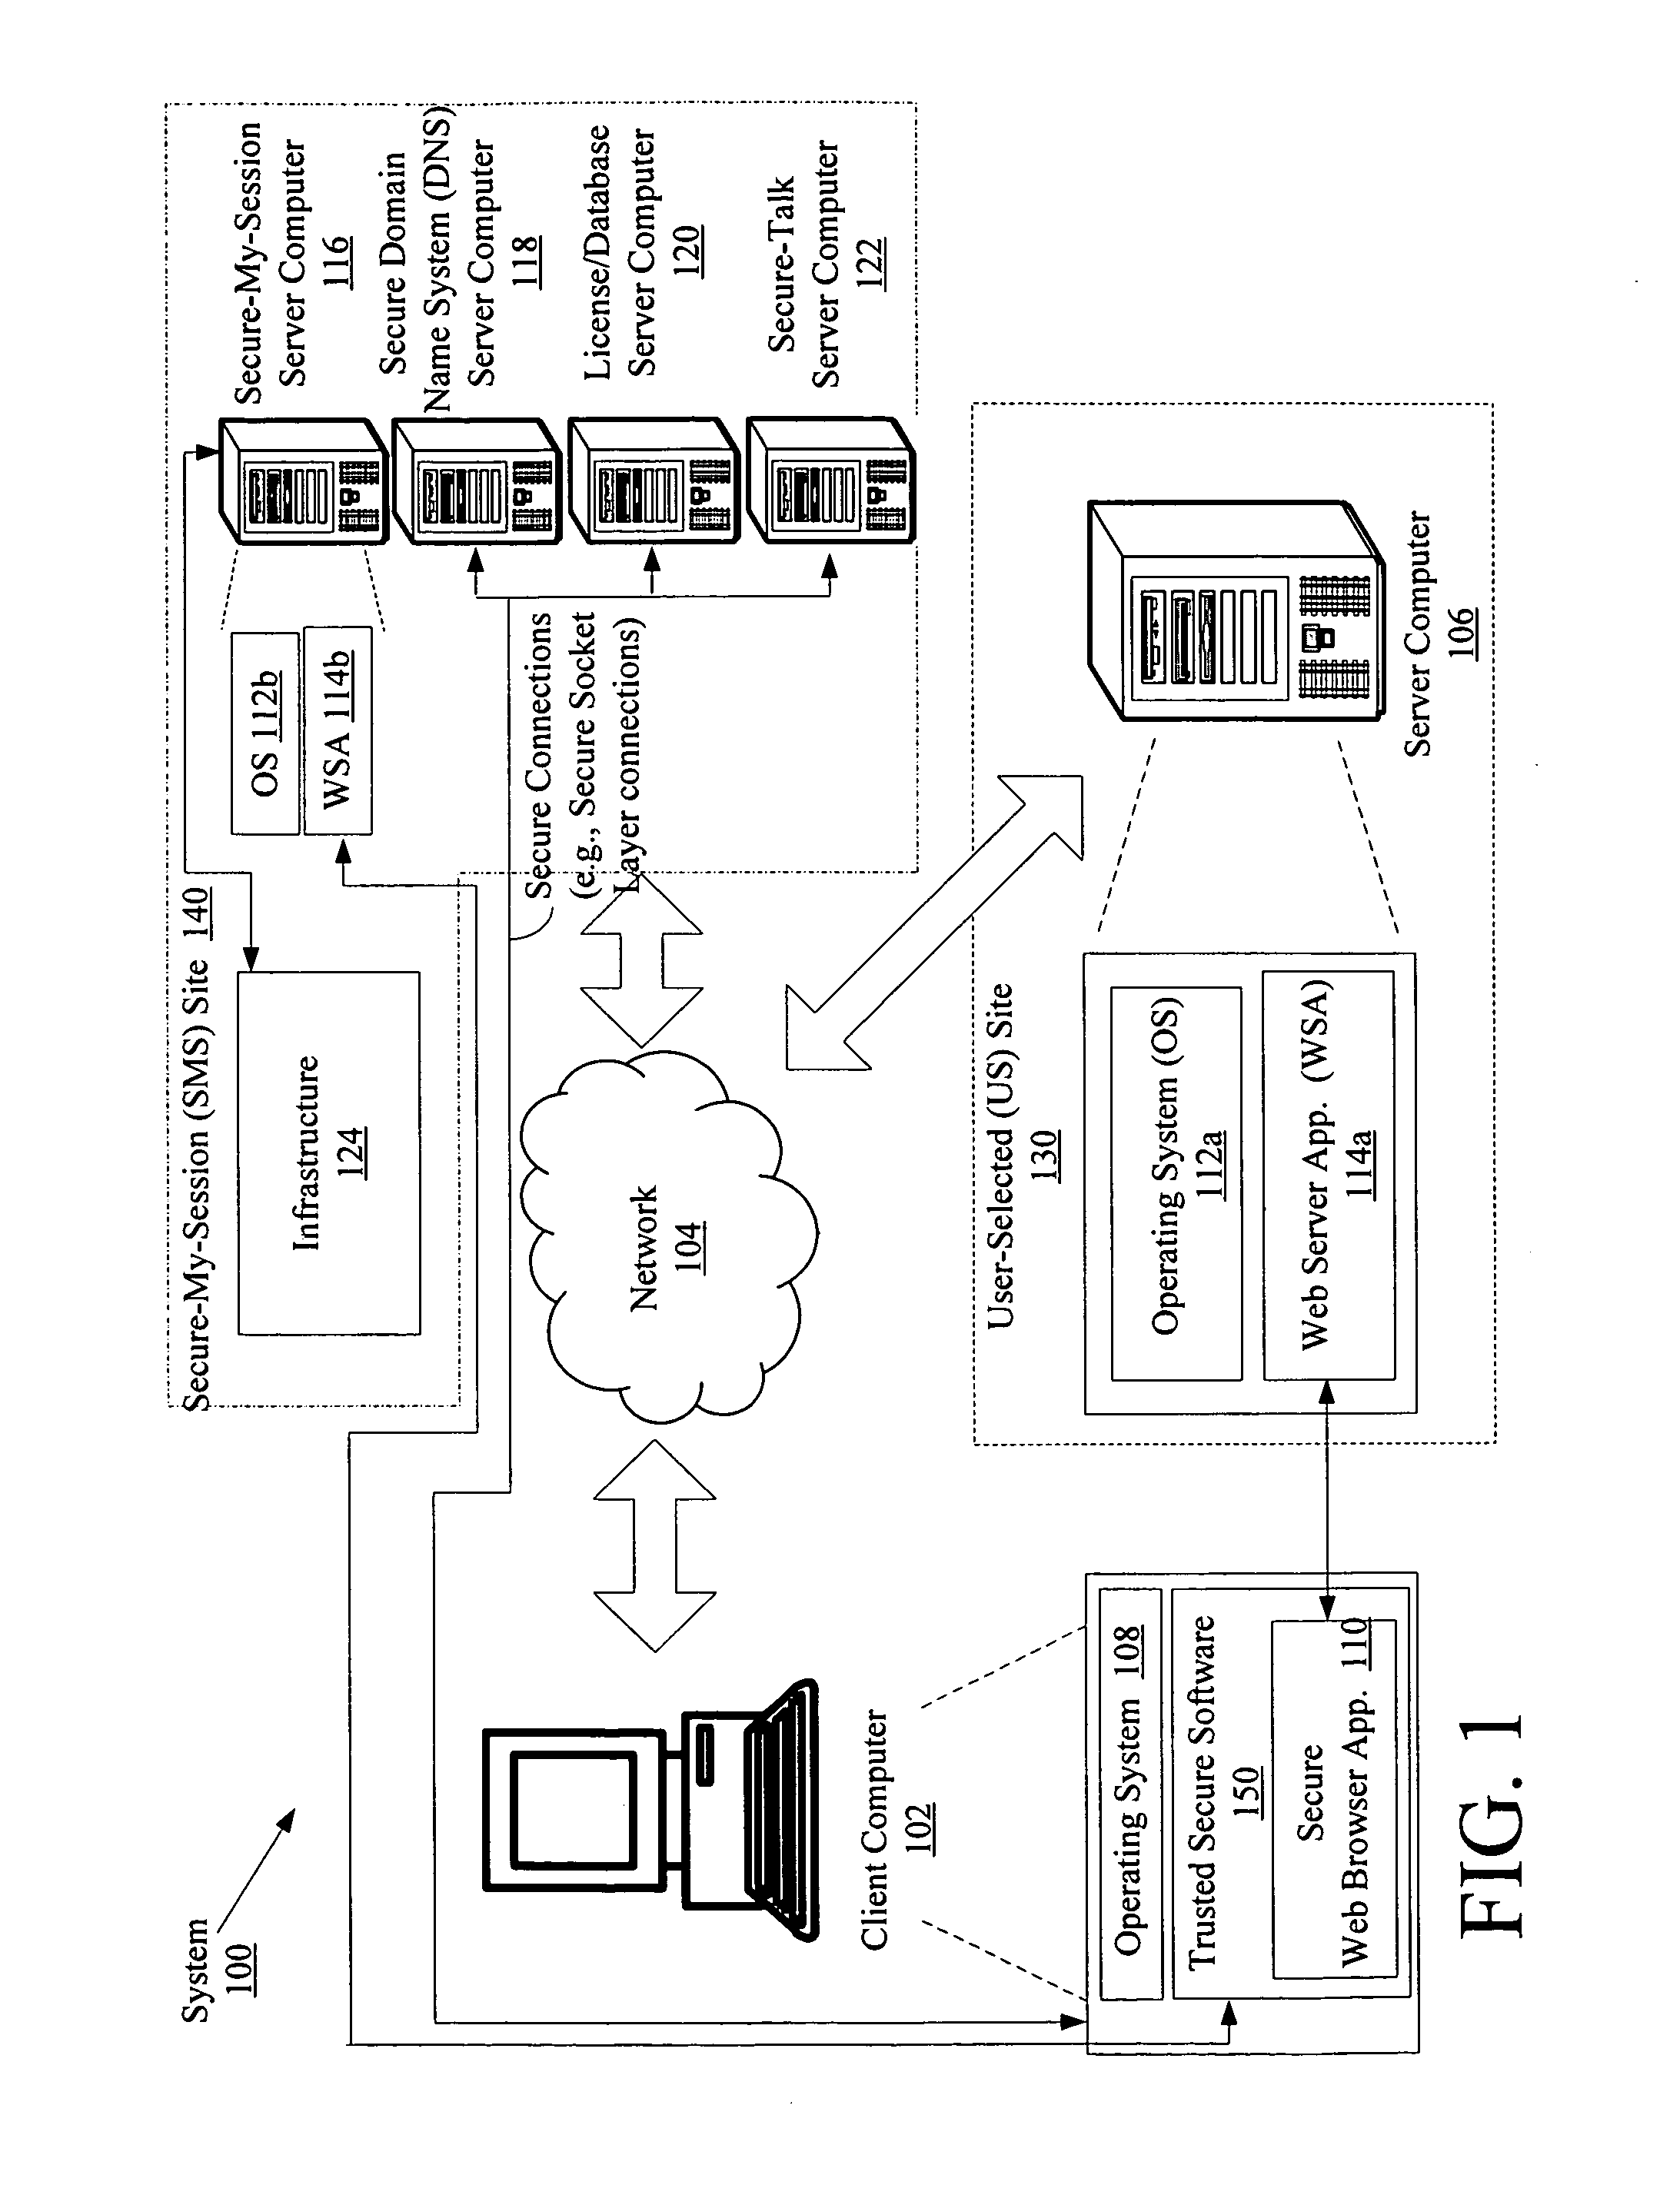 System and method for protecting data accessed through a network connection